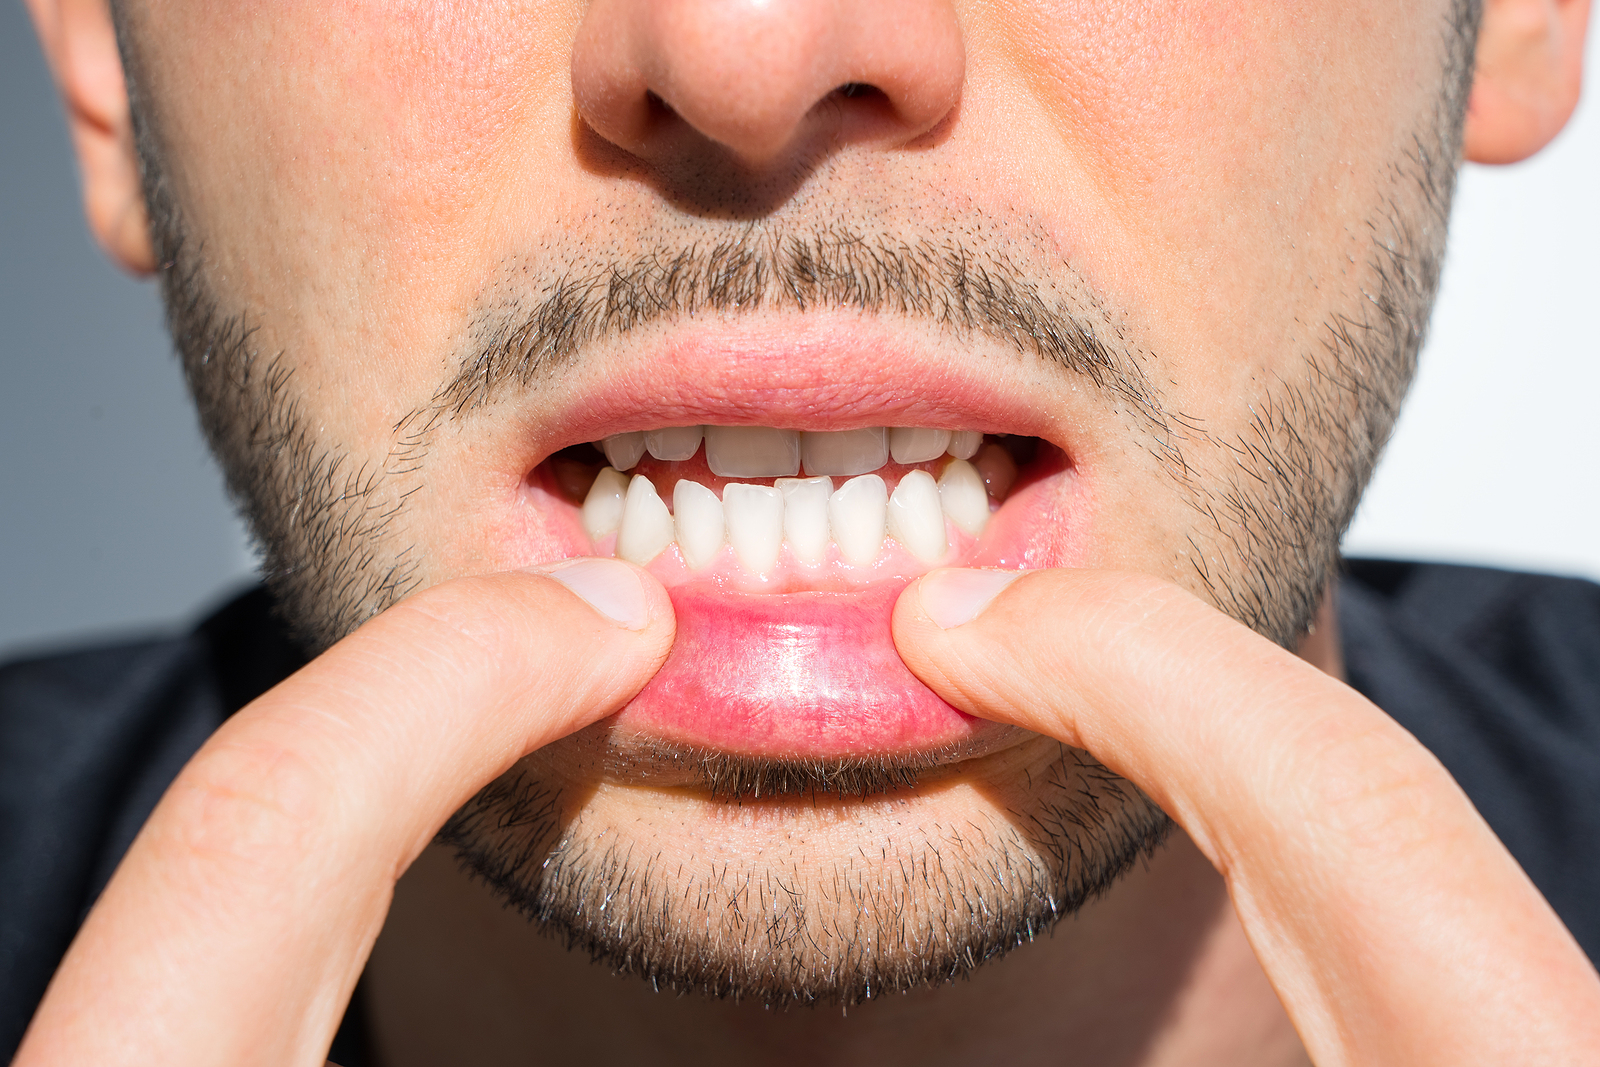 Gum Disease: Warning Signs and Prevention Methods - The New York Times